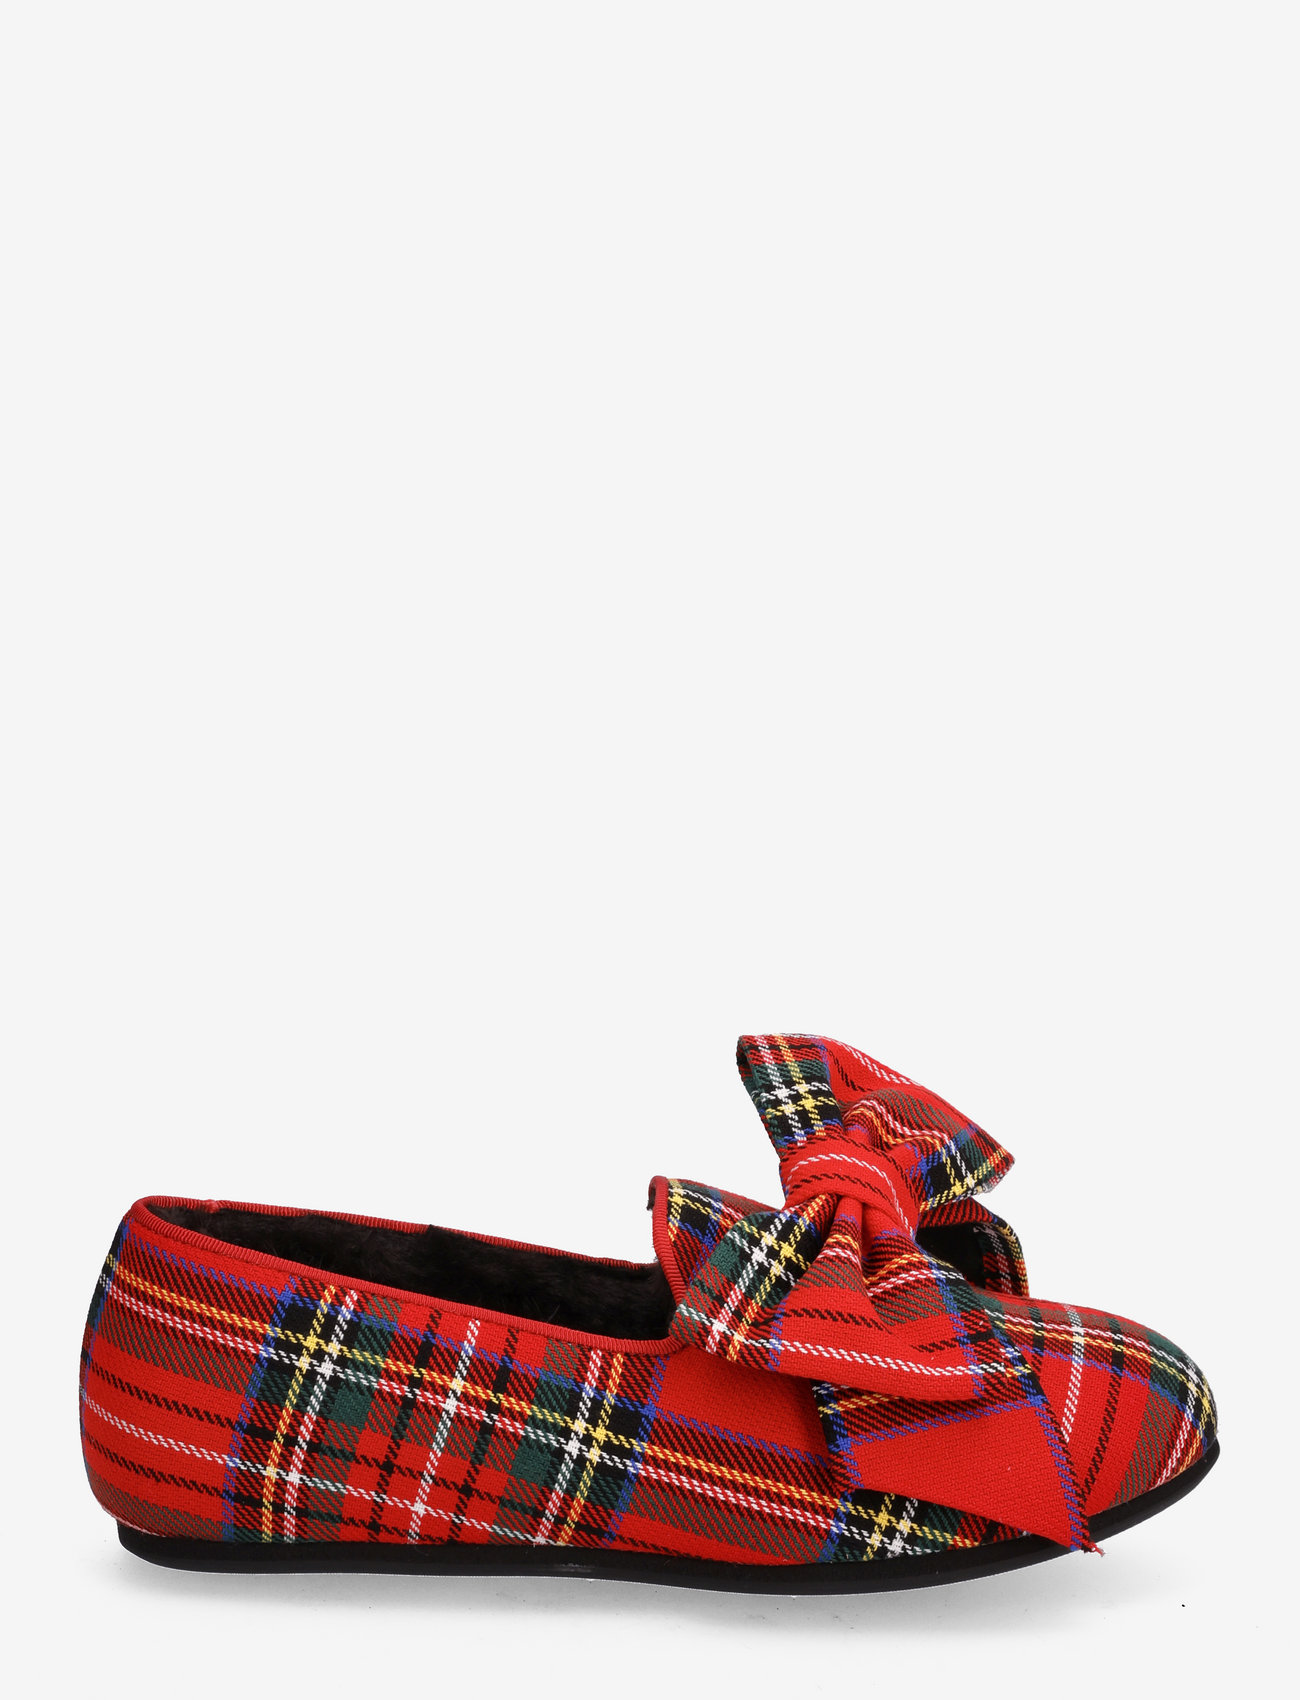 Hums - Punk  Bowtie  Loafer - birthday gifts - red - 1